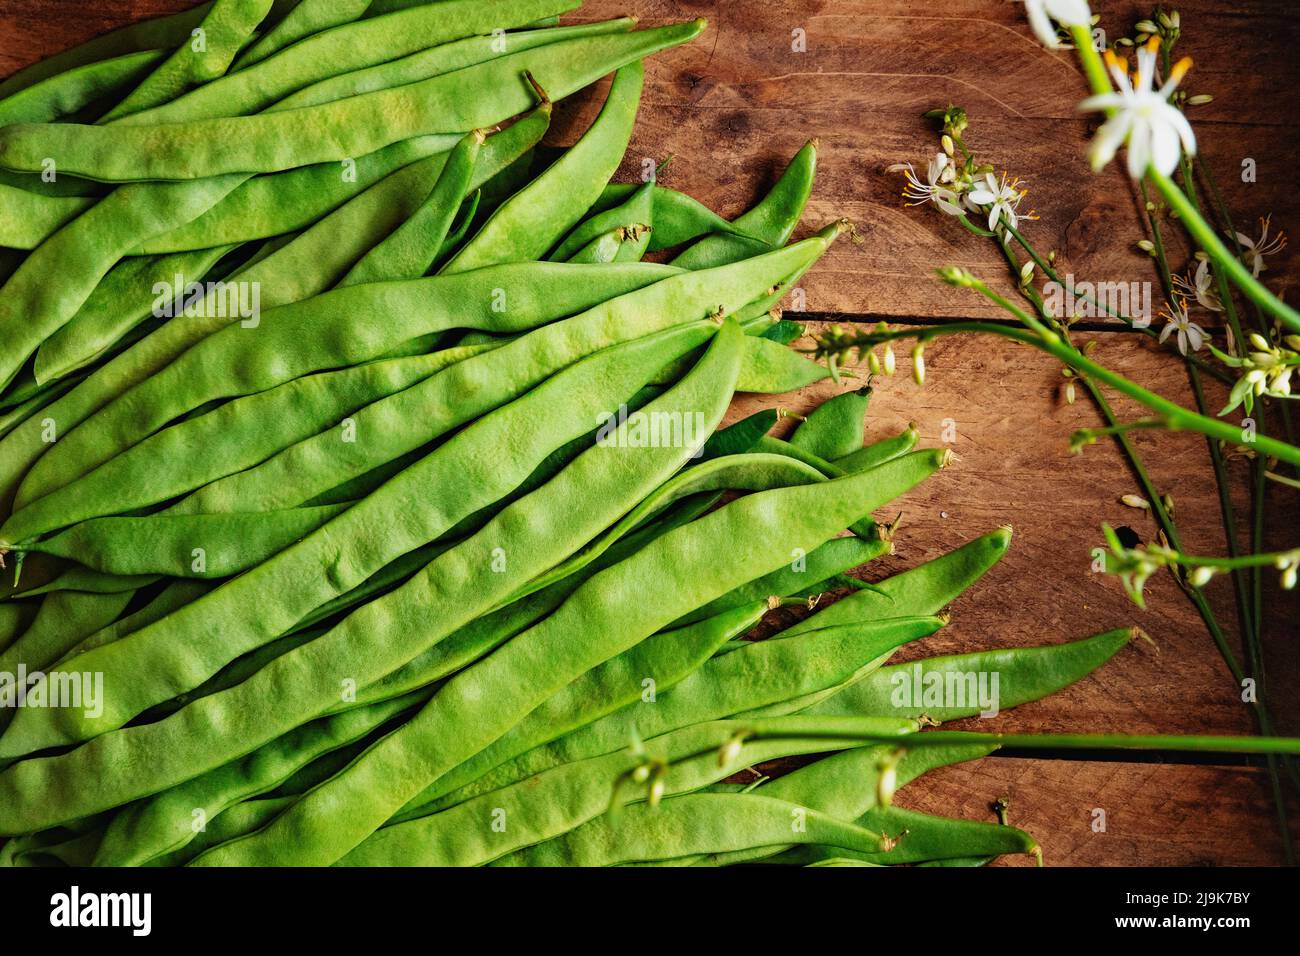 Rustic and natural image of freshly harvested fresh green beans.Healthy Food and cooking recipes Stock Photo